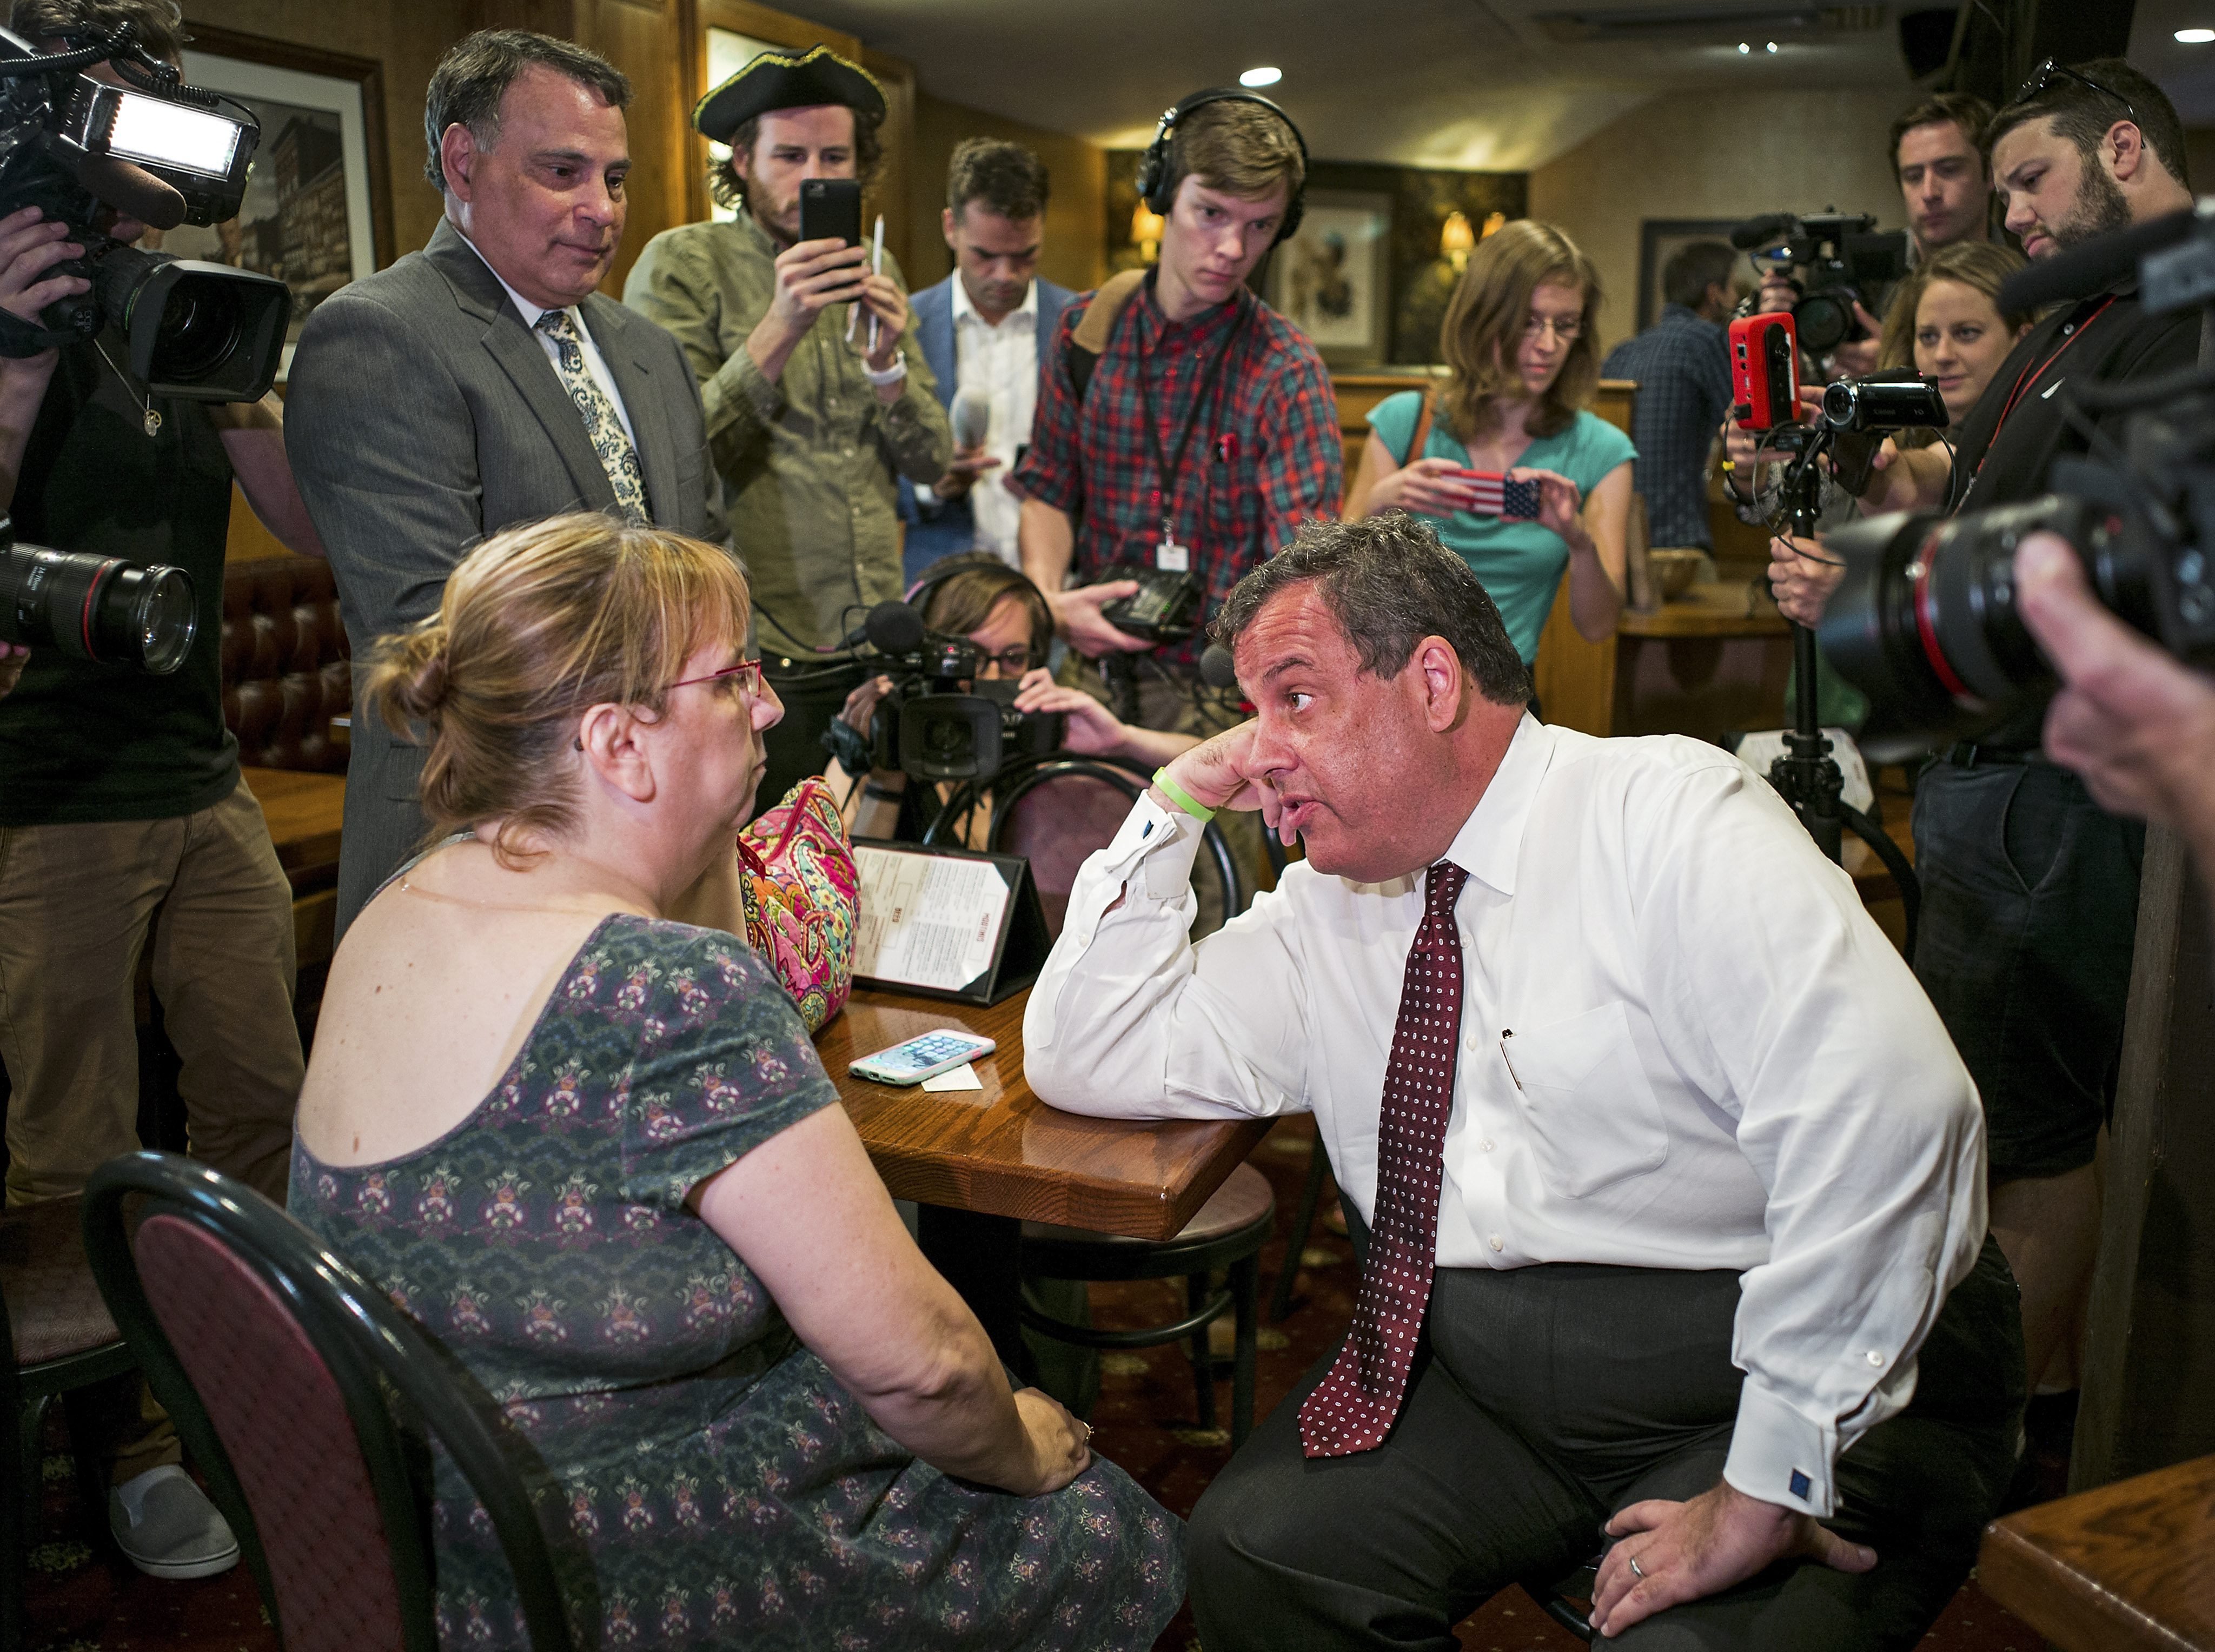 Chris Christie, Governor of New Jersey and candidate in the Republicans' presidential candidates race, talks with a voter at The Puritan Backroom in Manchester, N.H. on Aug. 3, 2015. (CJ Gunther—EPA)